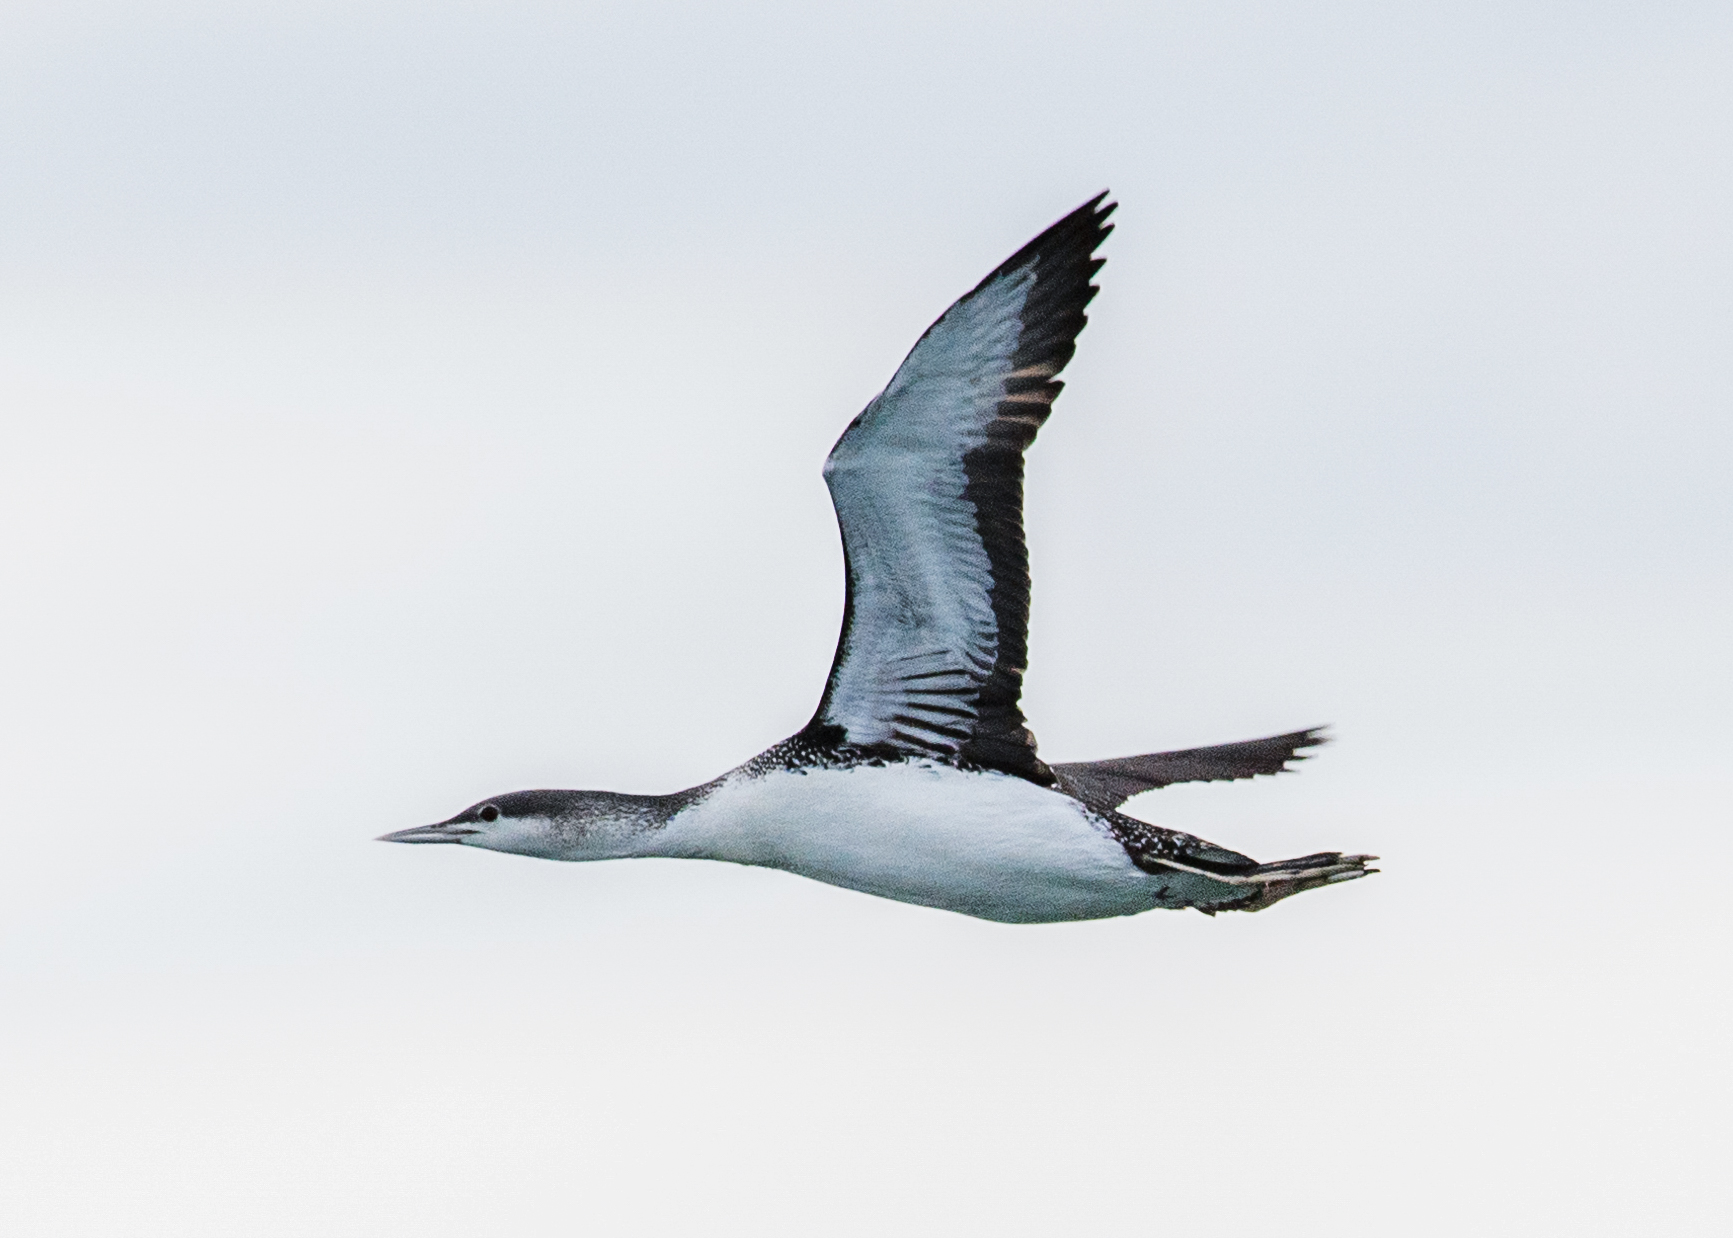 A photo of a red-throated loon, a black-and-white seabird, in flight with wings outstretched against a gray sky.